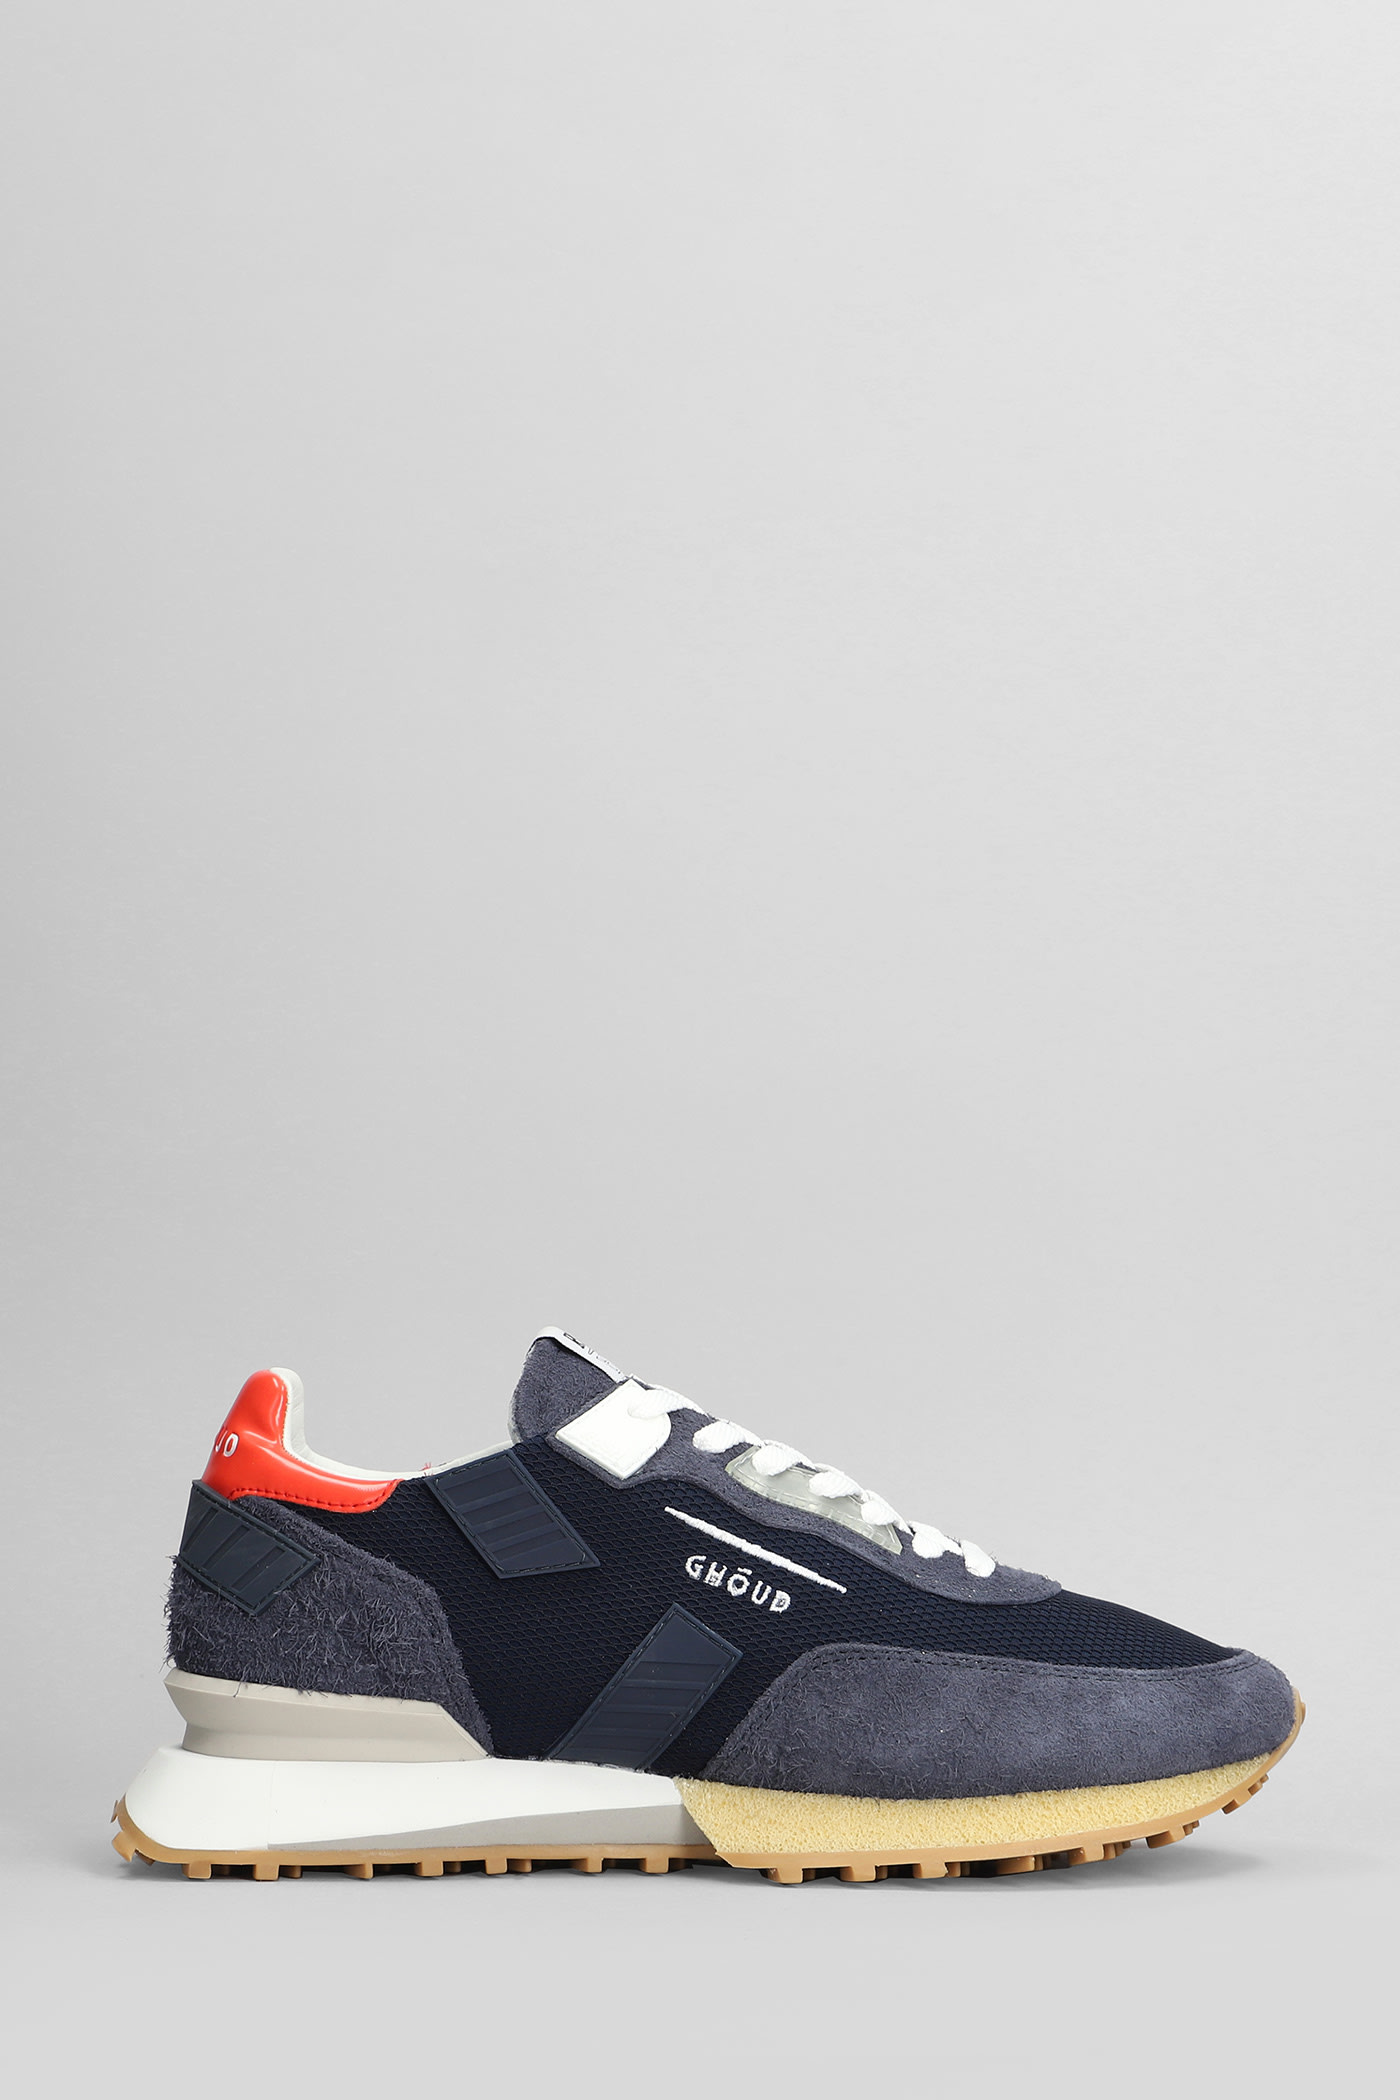 Rush Groove Sneakers In Blue Suede And Fabric